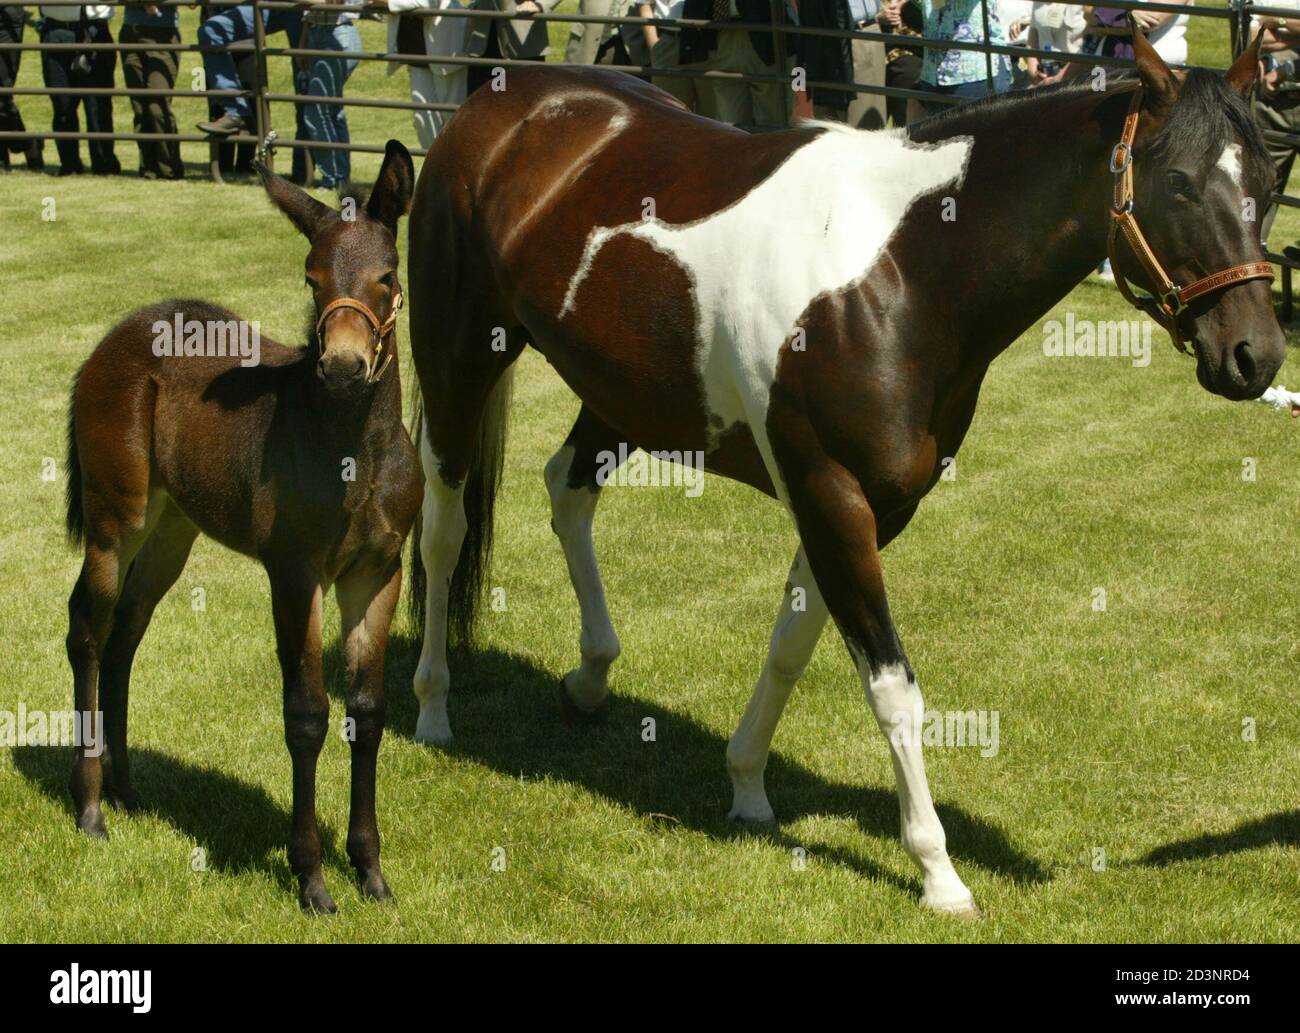 Idaho Gem (L), the first successful equine clone in the world, follows its  surrogate mother Idaho Syringa (R) in a corral at Idaho Gem's unveiling at  the University of Idaho (U.I.) in